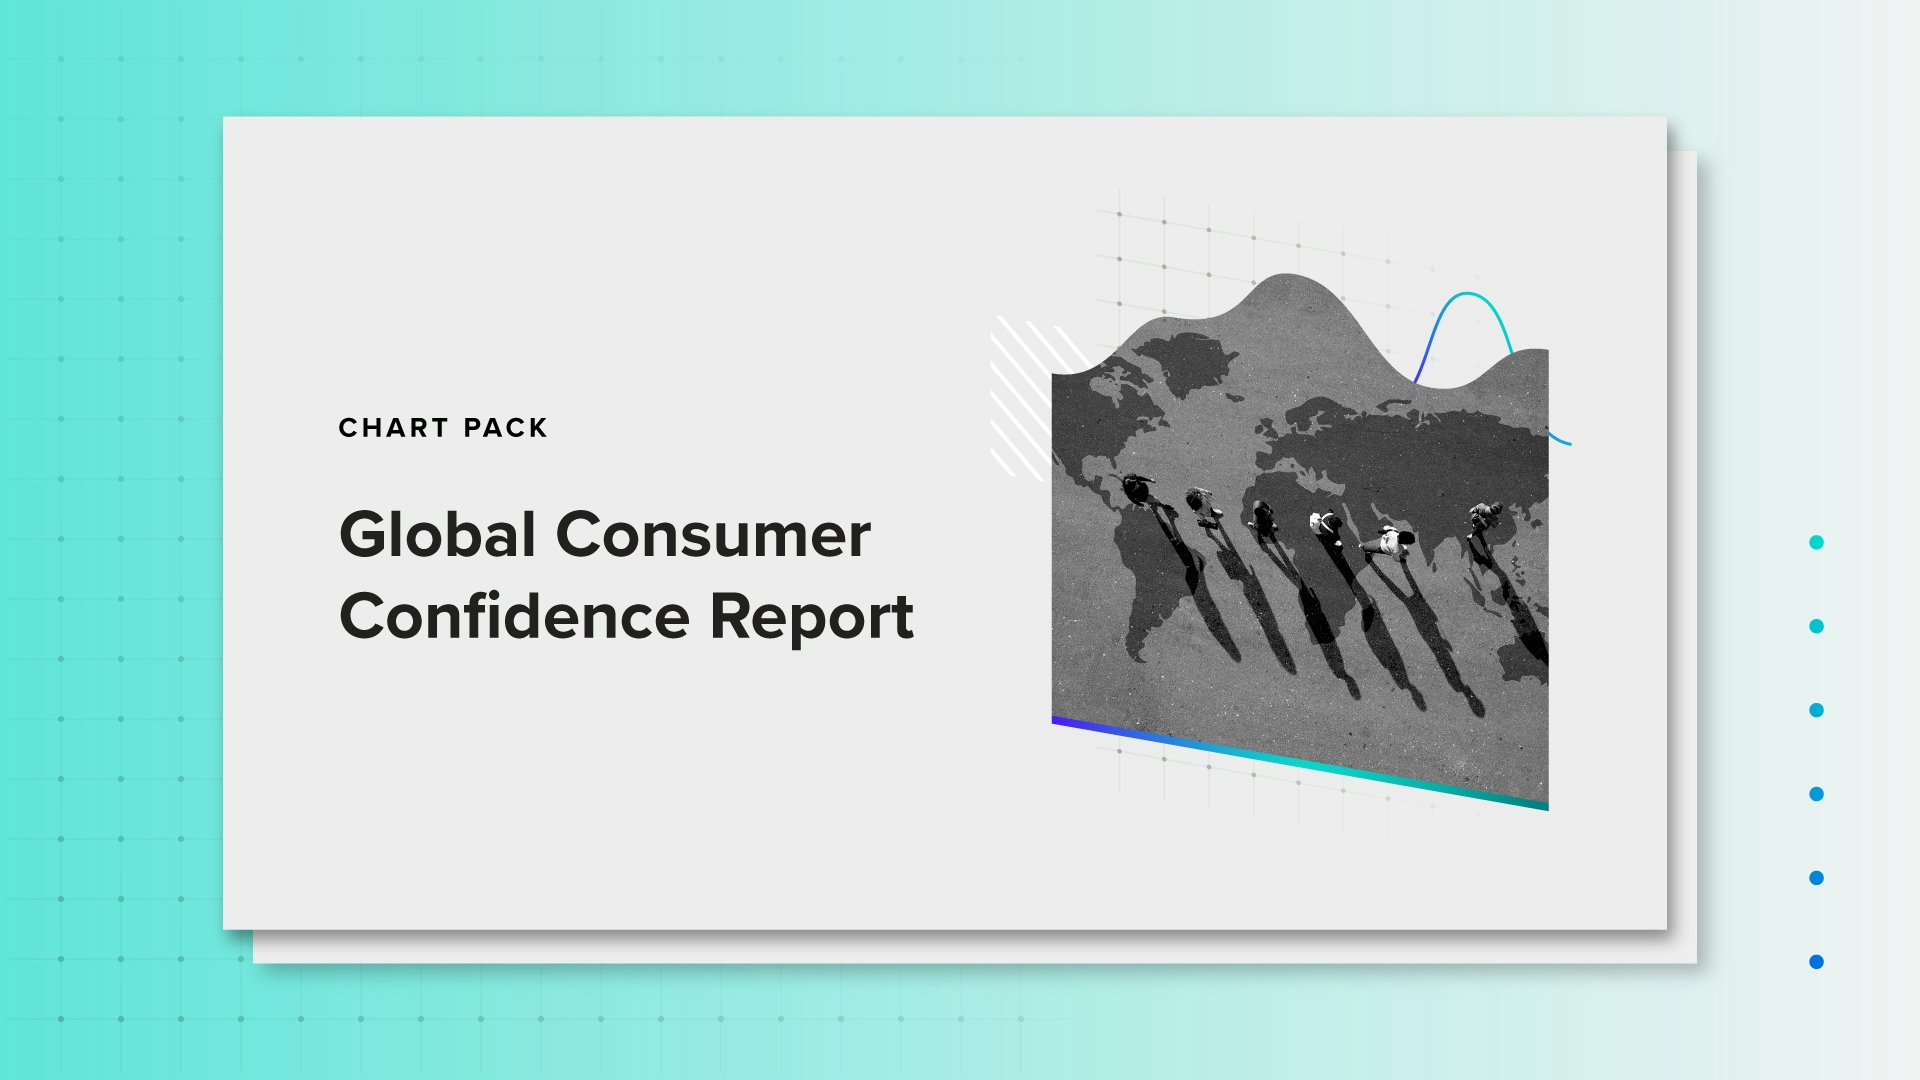 Download the Global Consumer Confidence Chart Pack.